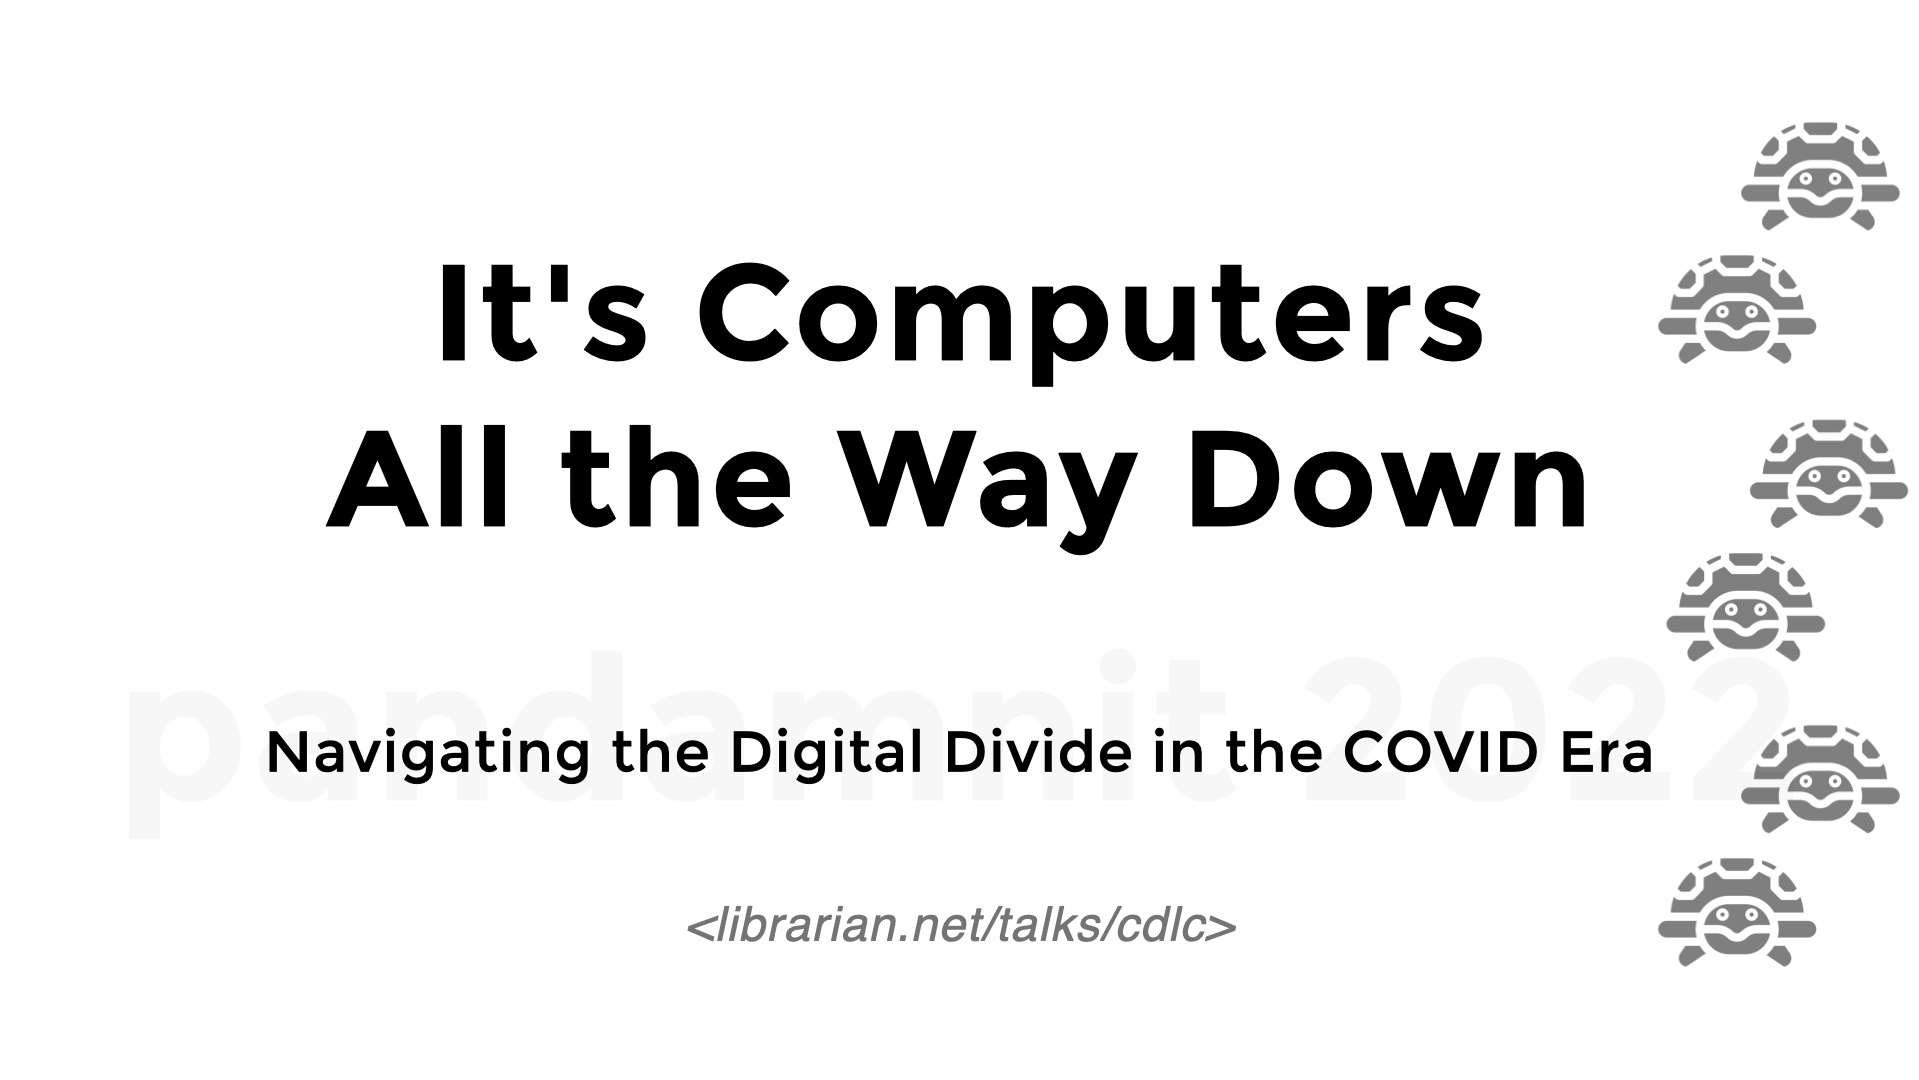 Title slide: It's Computers All the Way Down. Subtitle: Navigating the Digital Divide in the COVID Era 